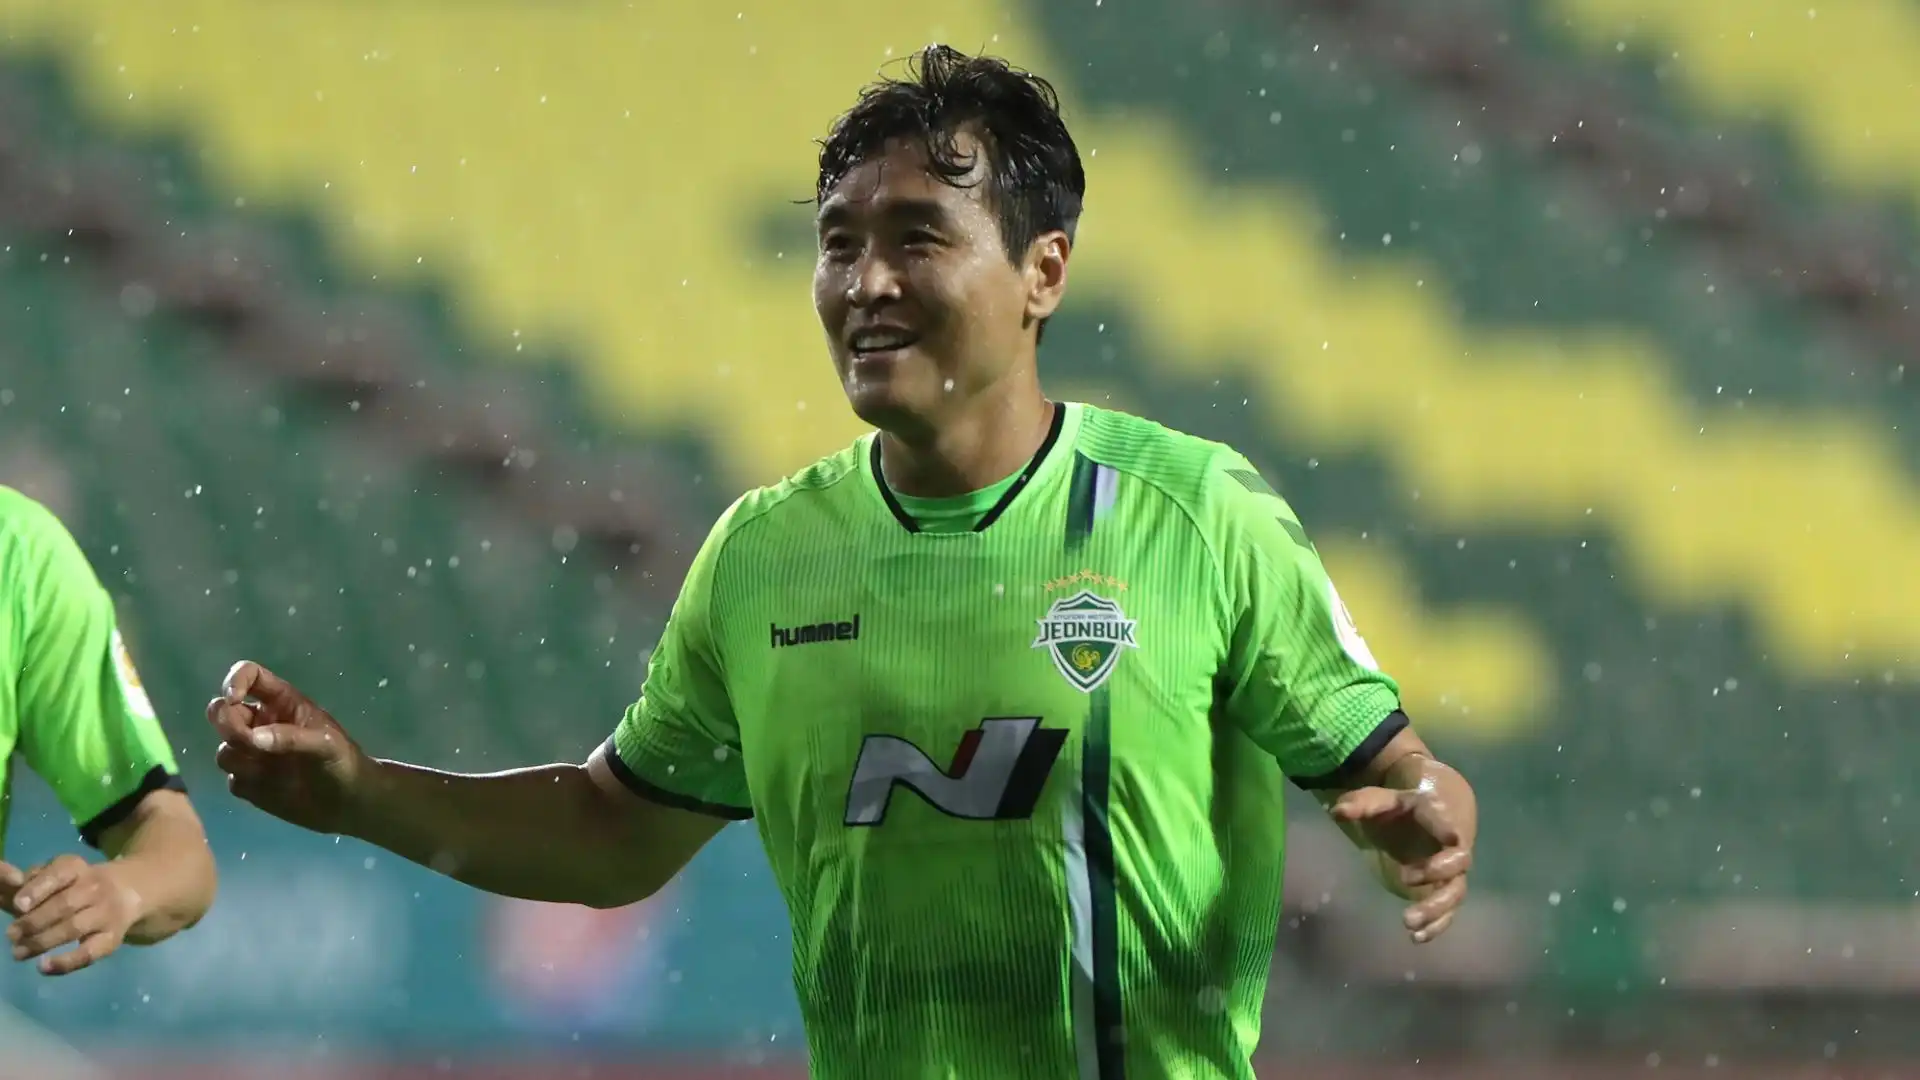 Lee Dong-gook (43 anni, Jeonbuk Hyundai): debutto professionale nel 1998 con i Pohang Steelers